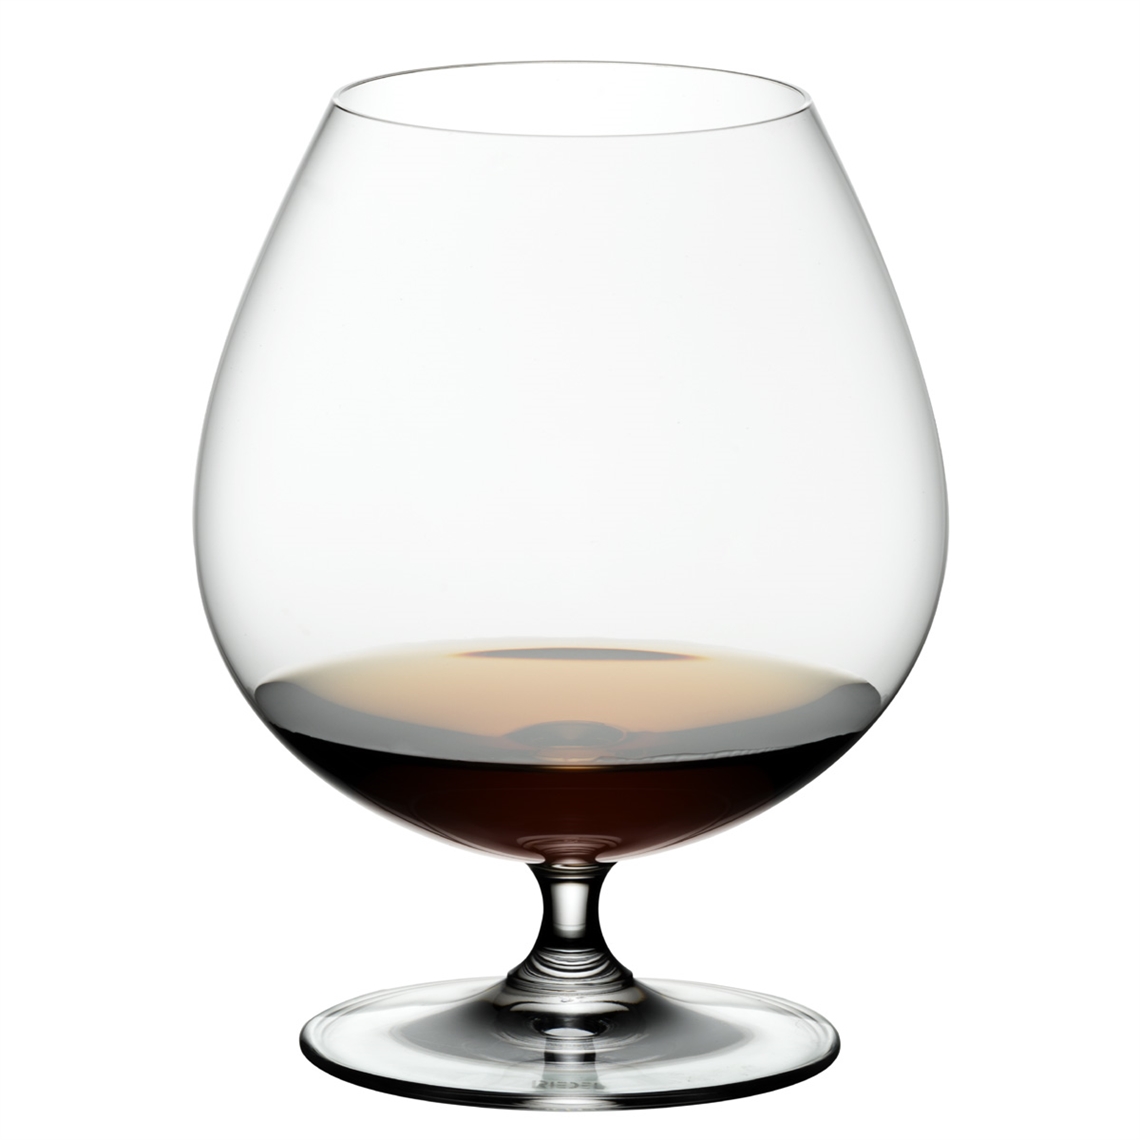 View more water glasses / tumblers from our Spirit Glasses range